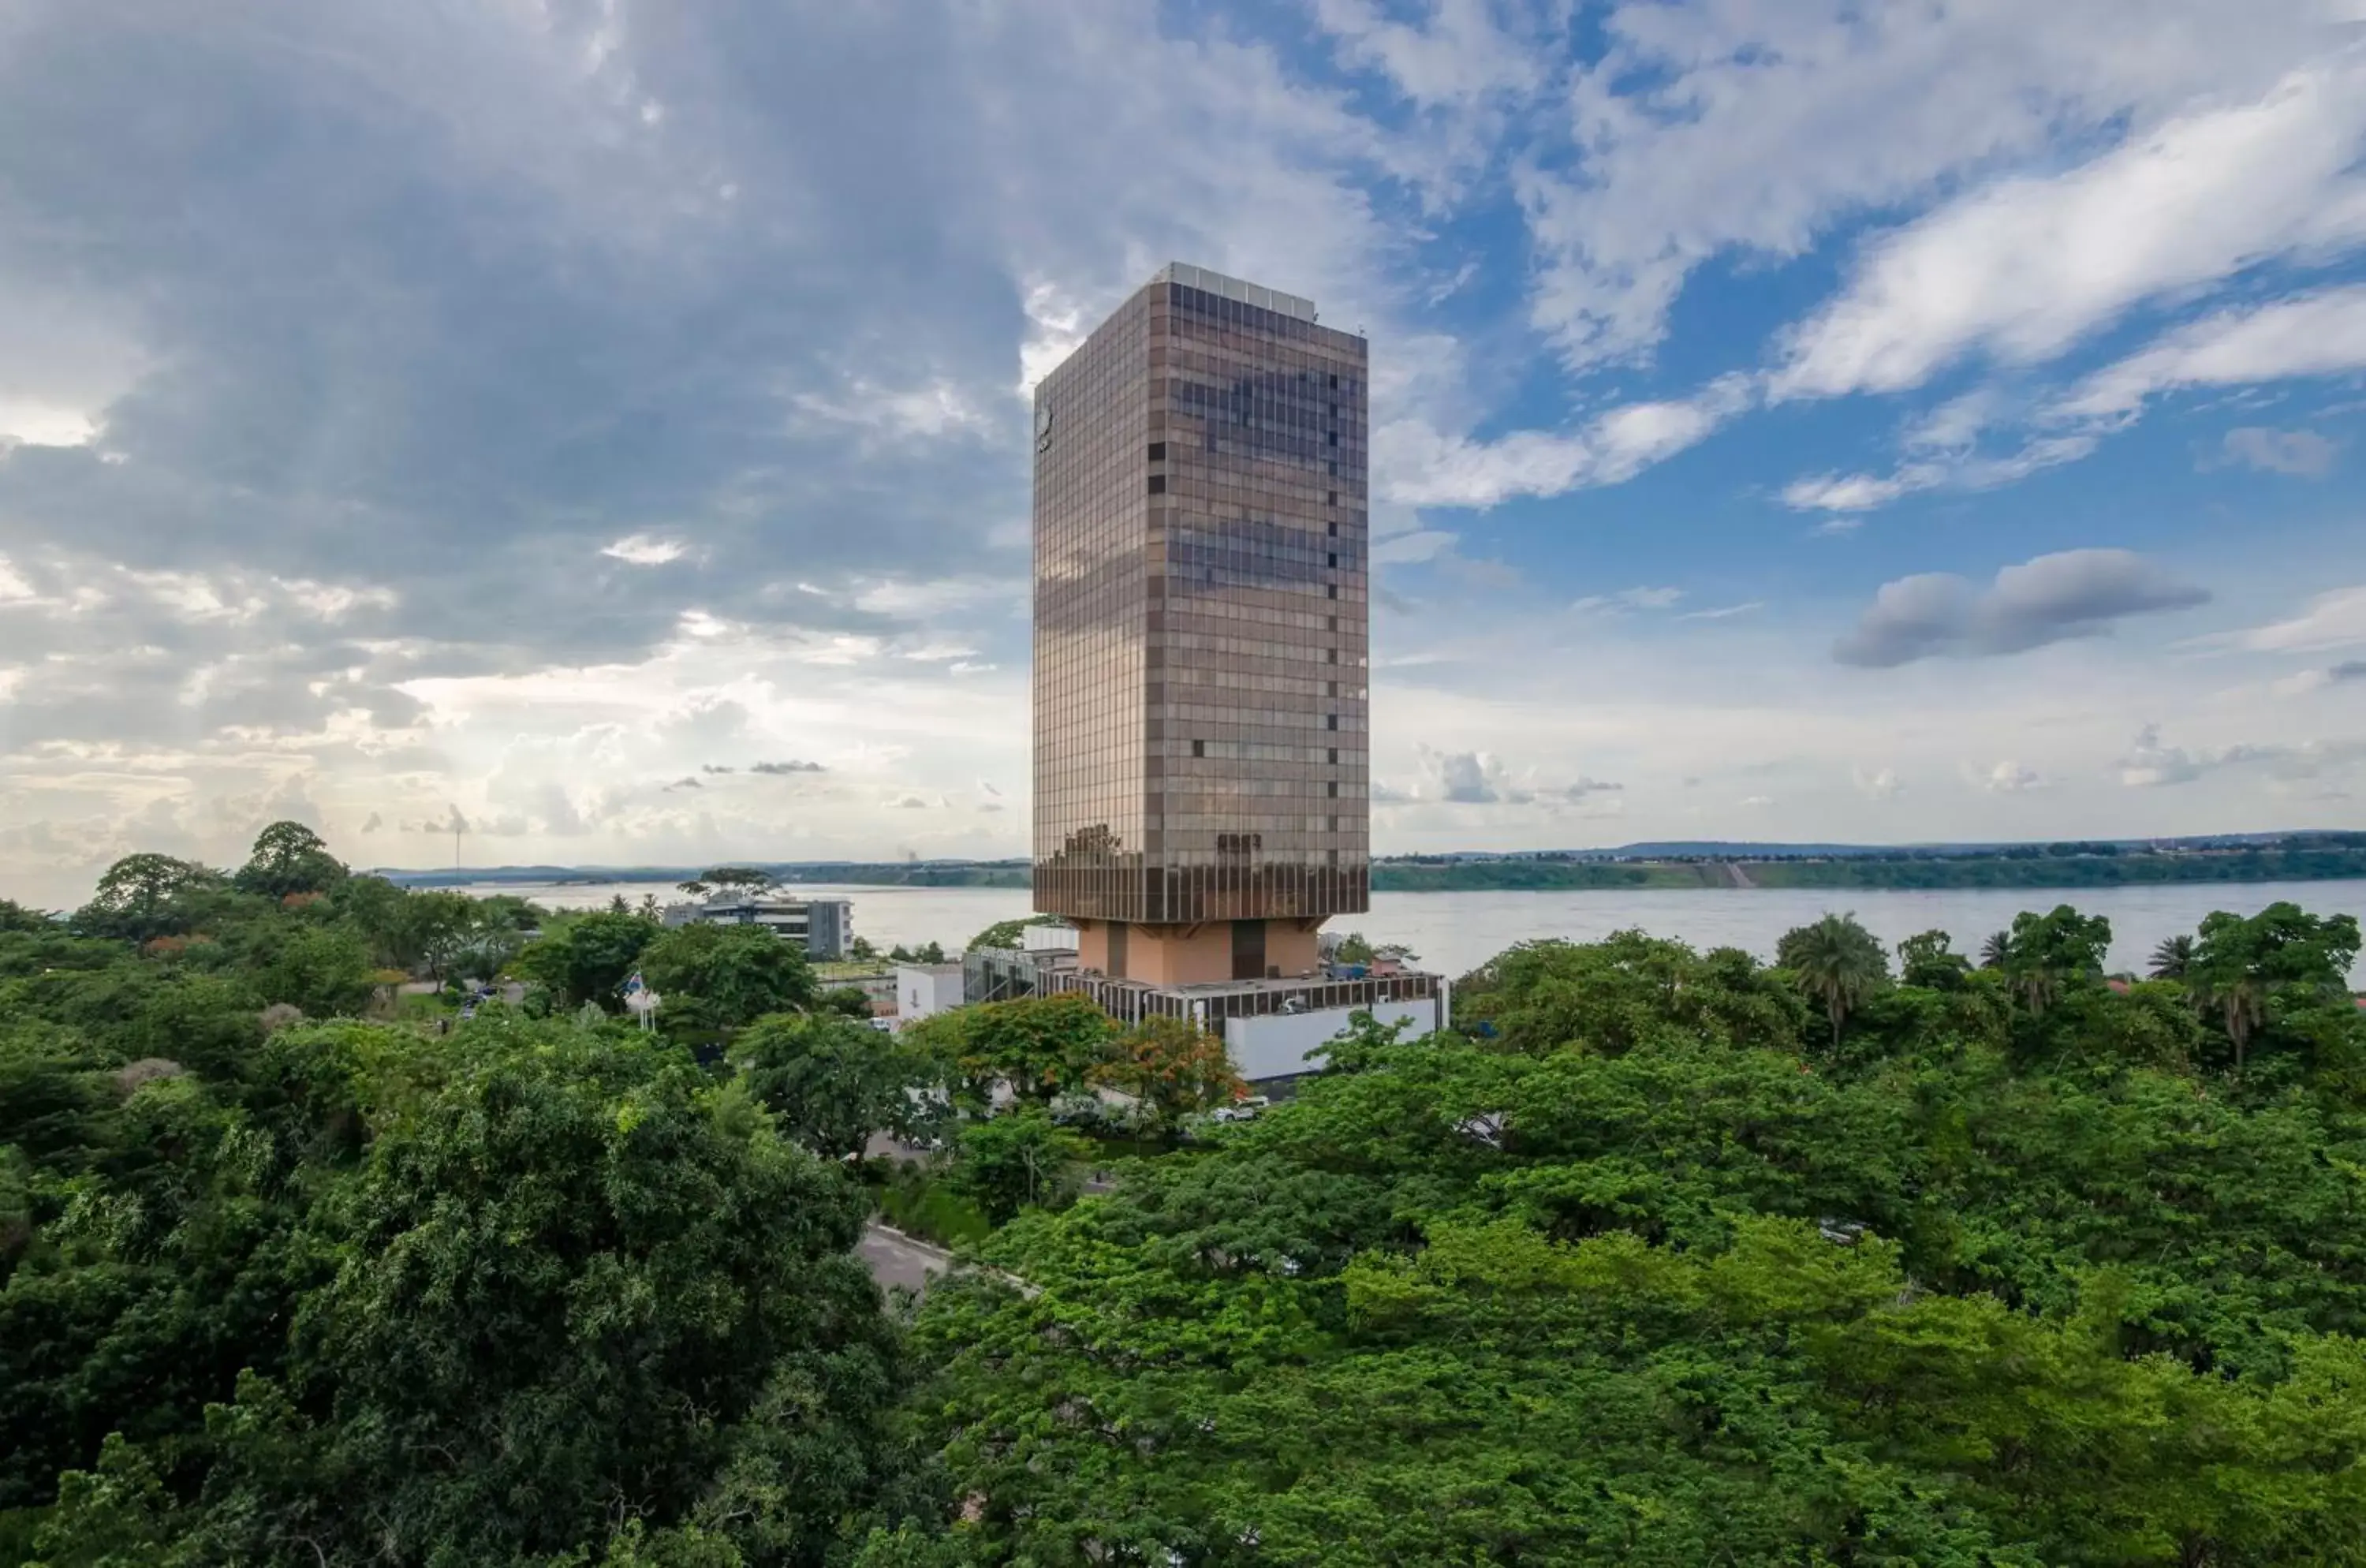 Property building in Fleuve Congo Hotel By Blazon Hotels